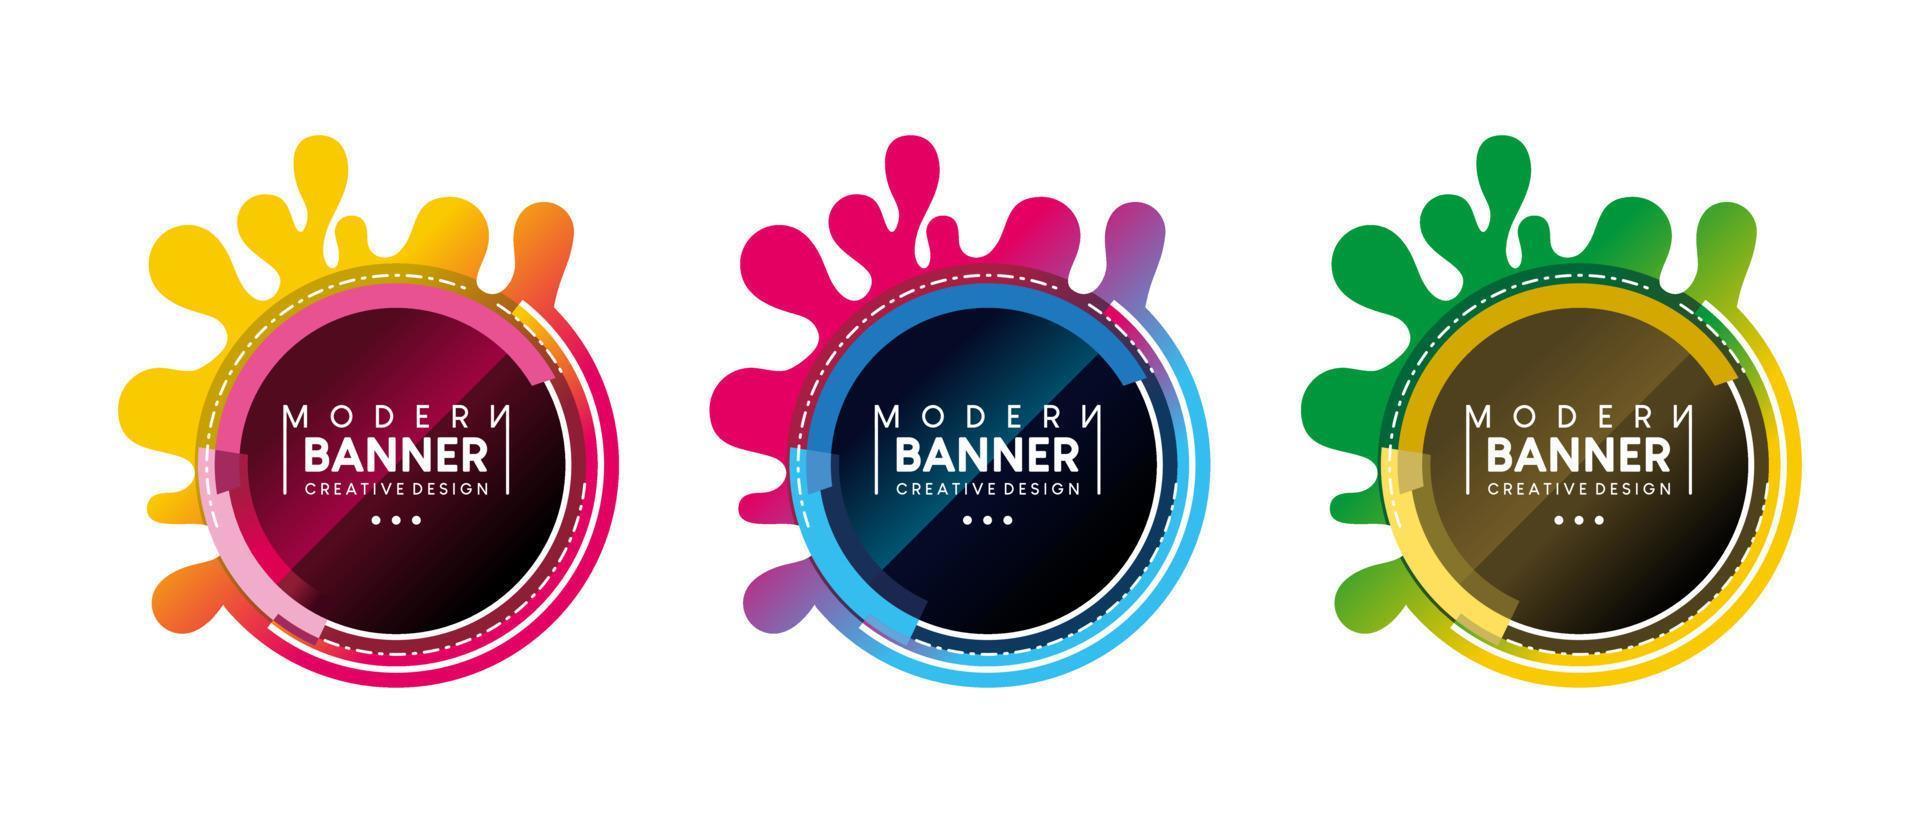 Modern abstract banner element design in different colors vector